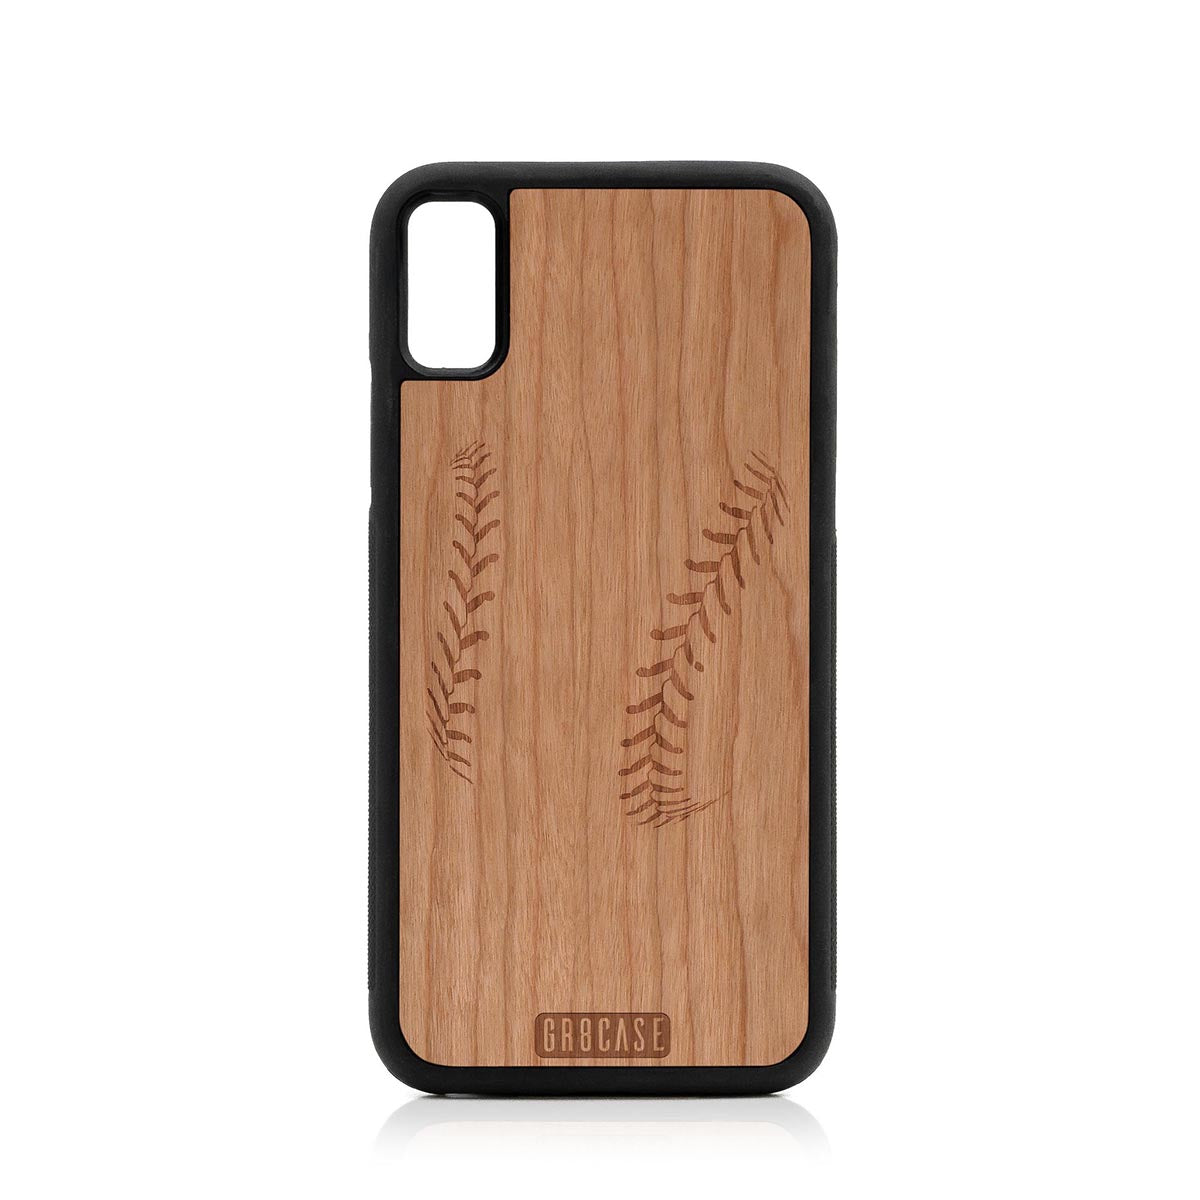 Baseball Slim Case Stitches Design Wood Case For iPhone XR by GR8CASE